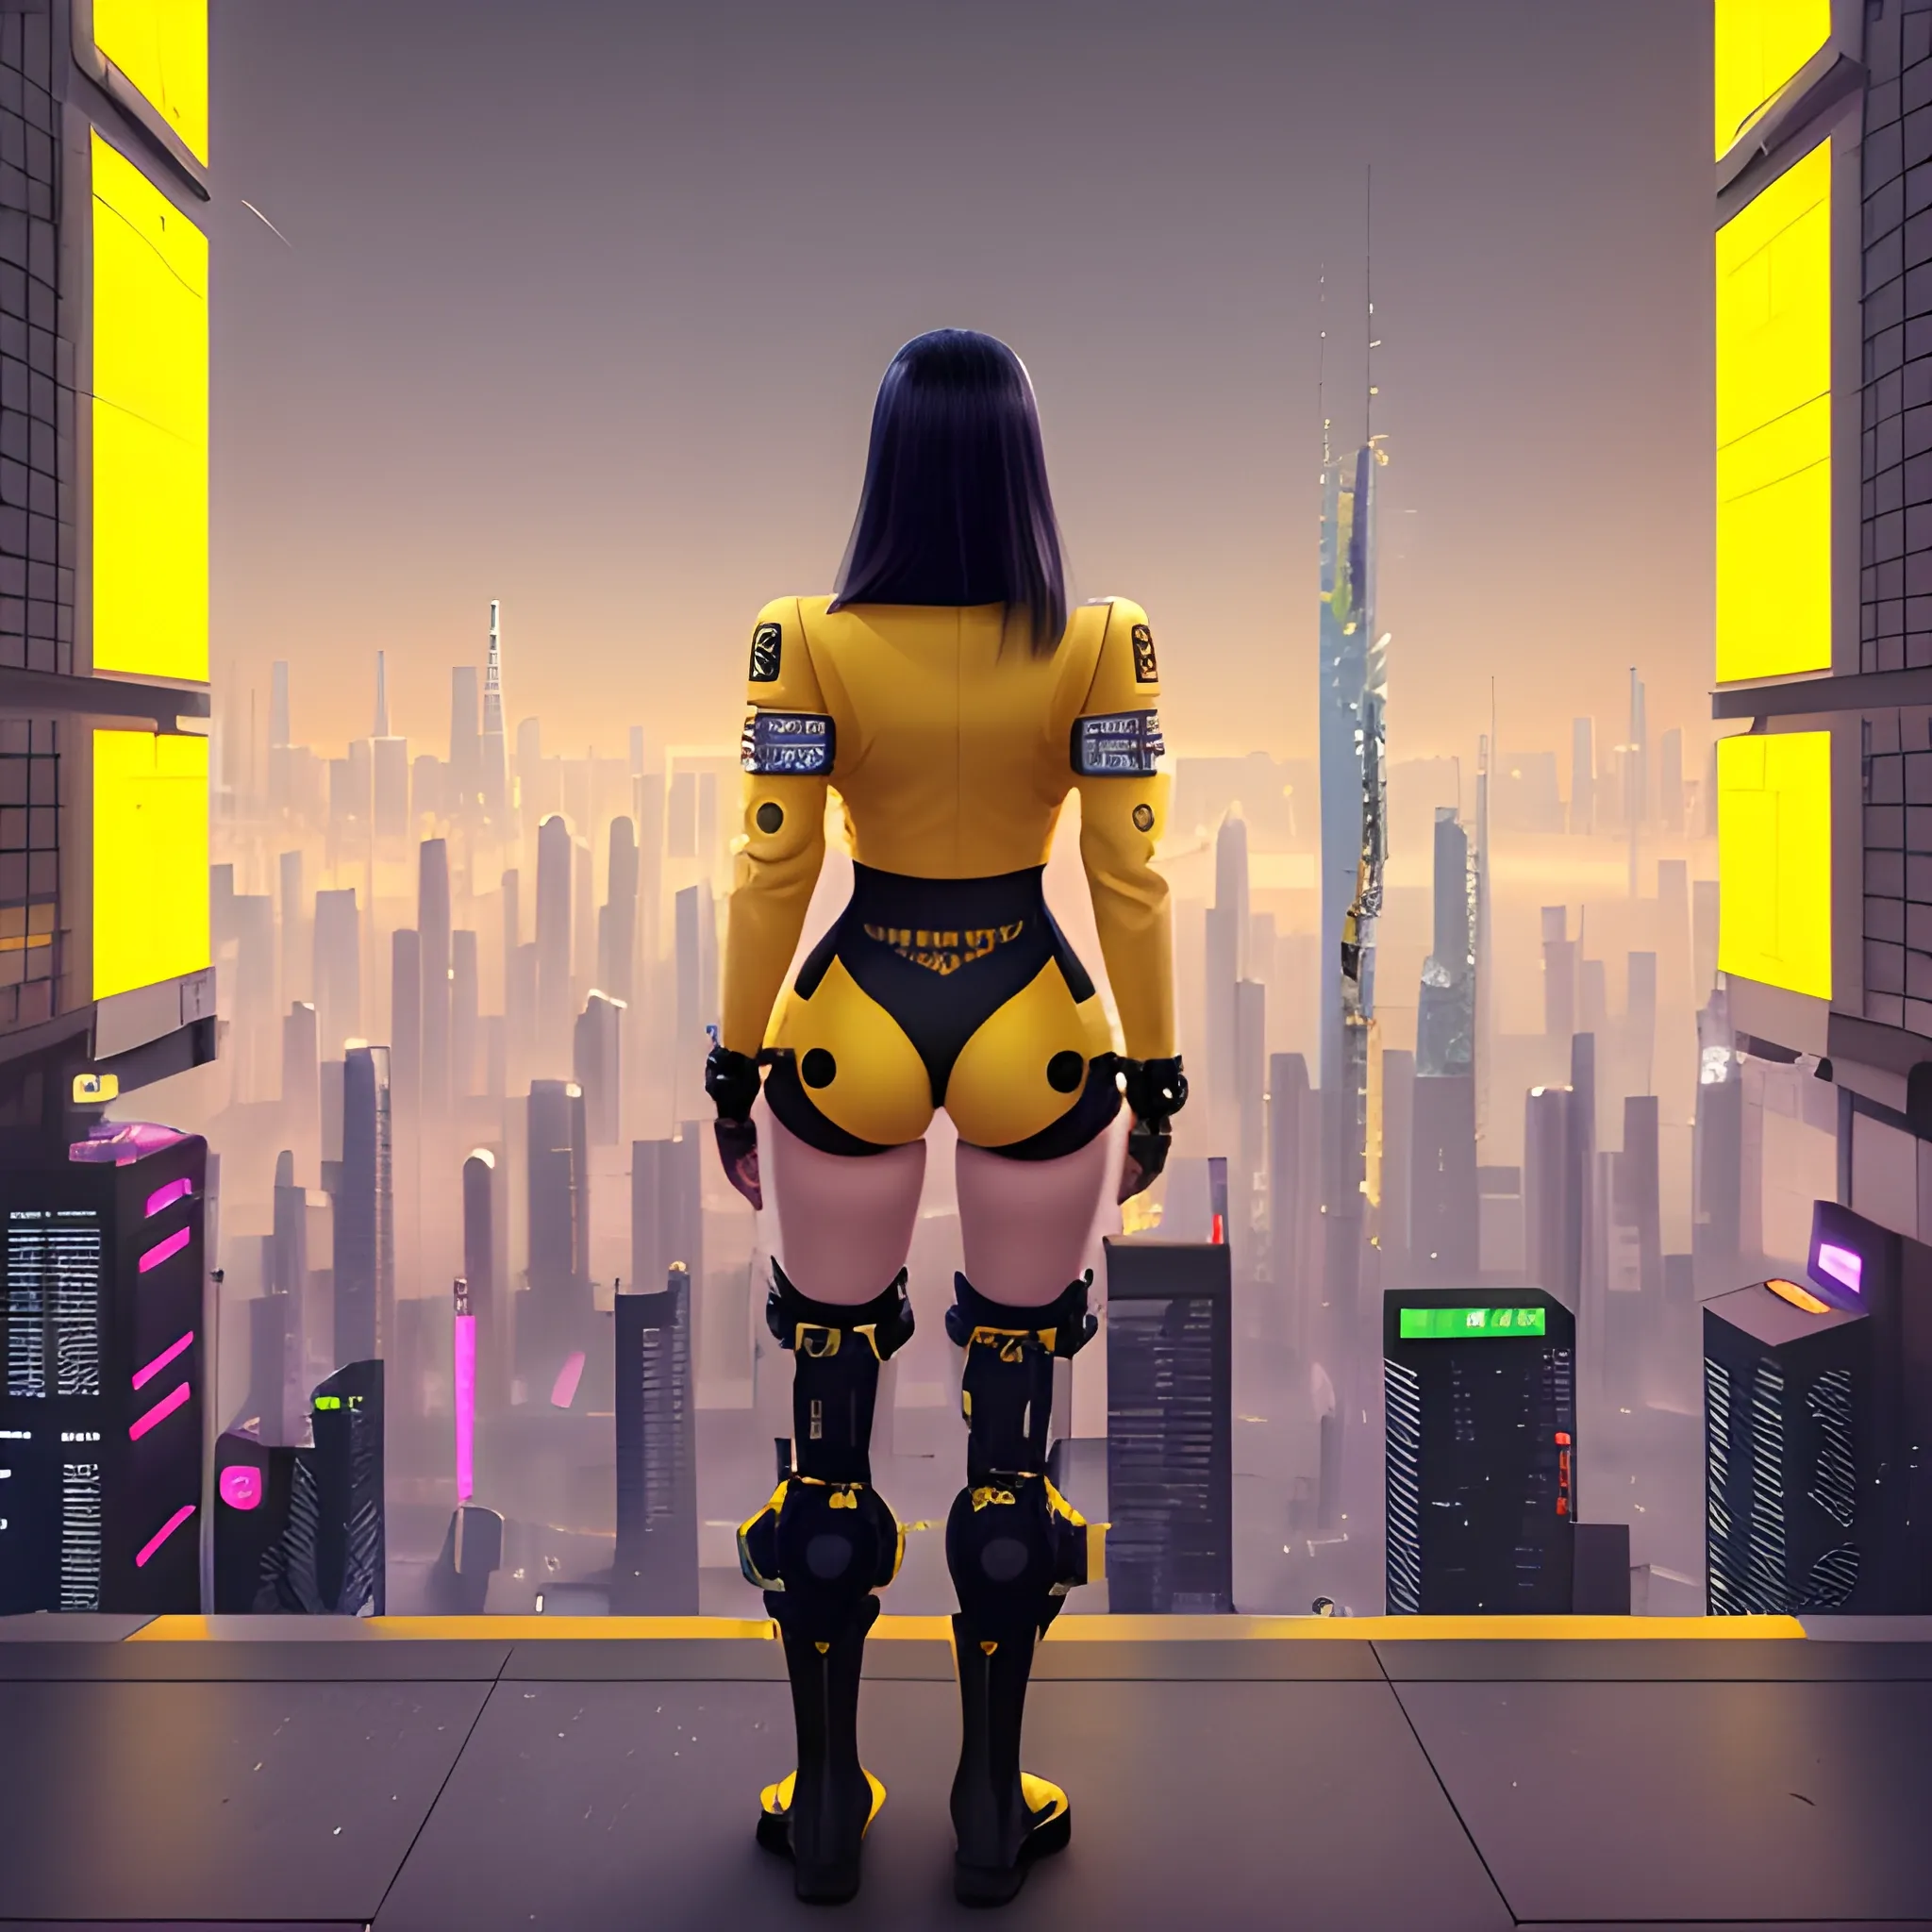 a woman in a yellow outfit and black boots stands in front of a city, cyberpunk art by Kim Hong-do, cgsociety, retrofuturism, cgsociety 9, full body cgsociety, worksafe.cgsociety